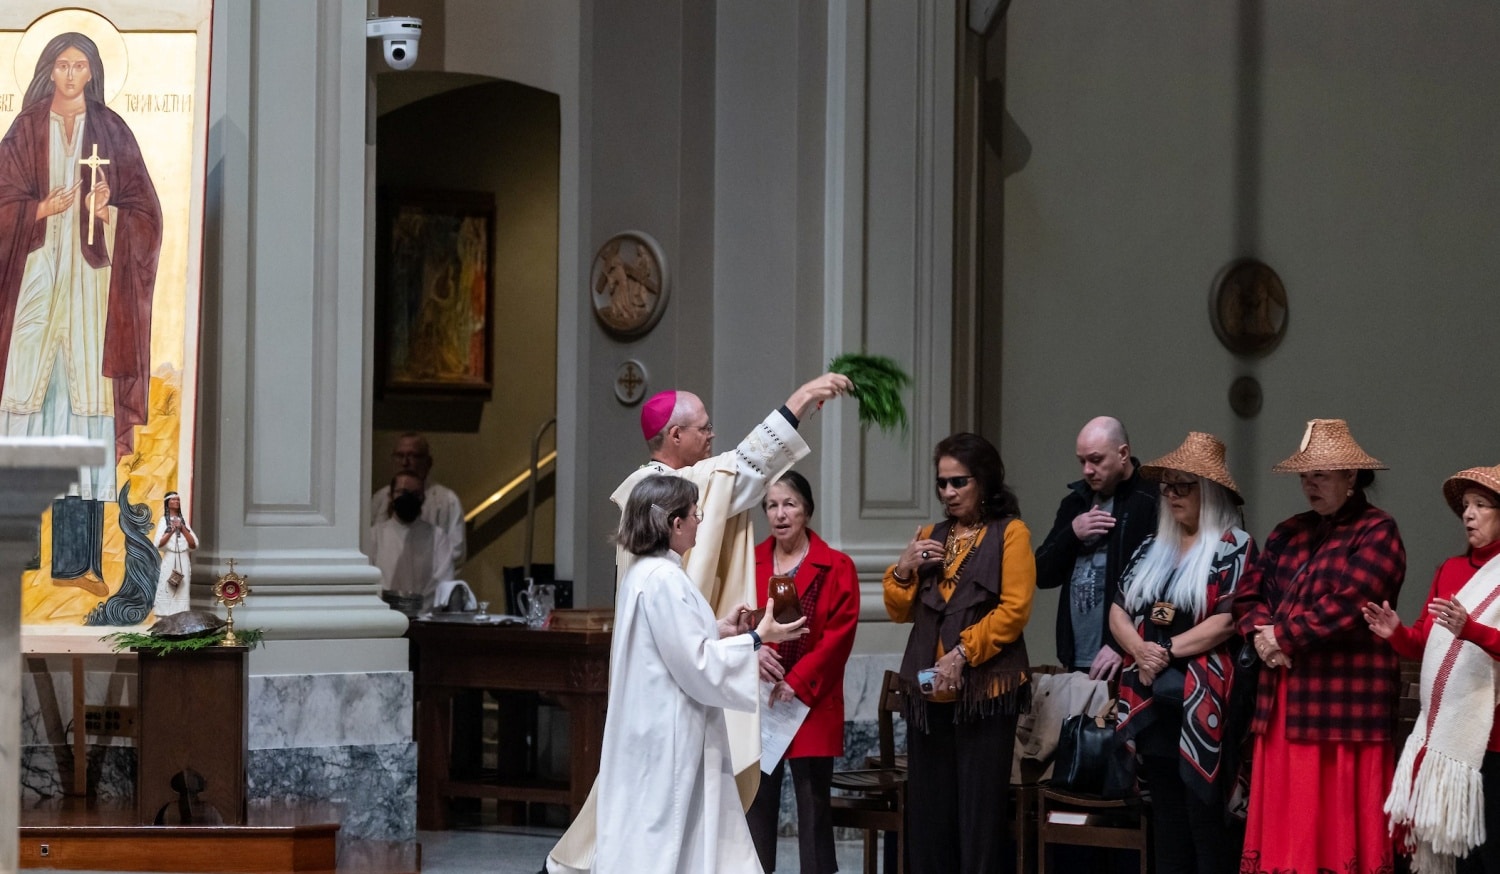 Archbishop Paul D. Etienne of Seattle uses holy water to bless the congregation during Mass at St. James Cathedral in Seattle Oct. 22, 2022. The Mass was in recognition of the 10th Anniversary of the canonization of St. Kateri Tekakwitha. (CNS photo/Stephen Brashear, Northwest Catholic)